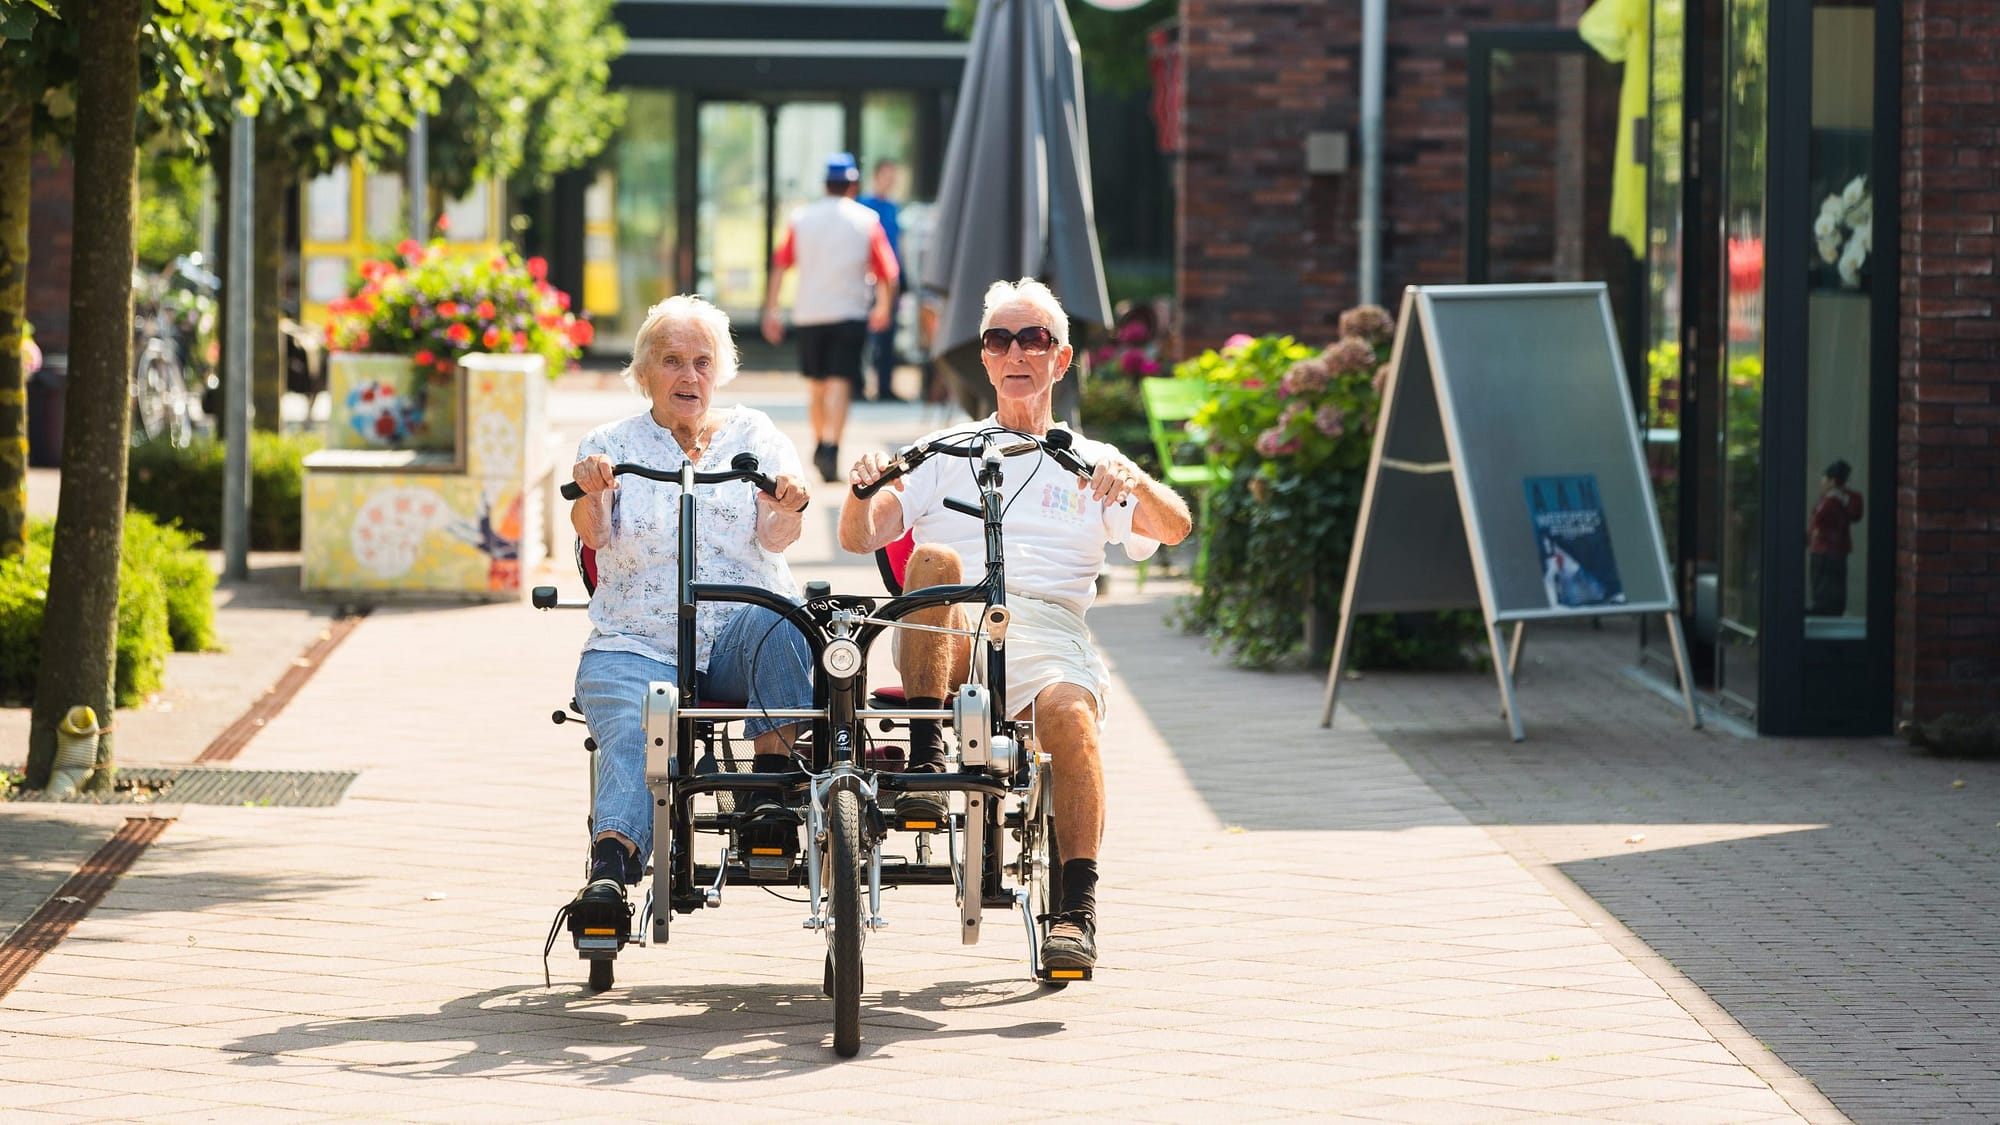 Image: Two residents of Hogeweyk cycling together outside!